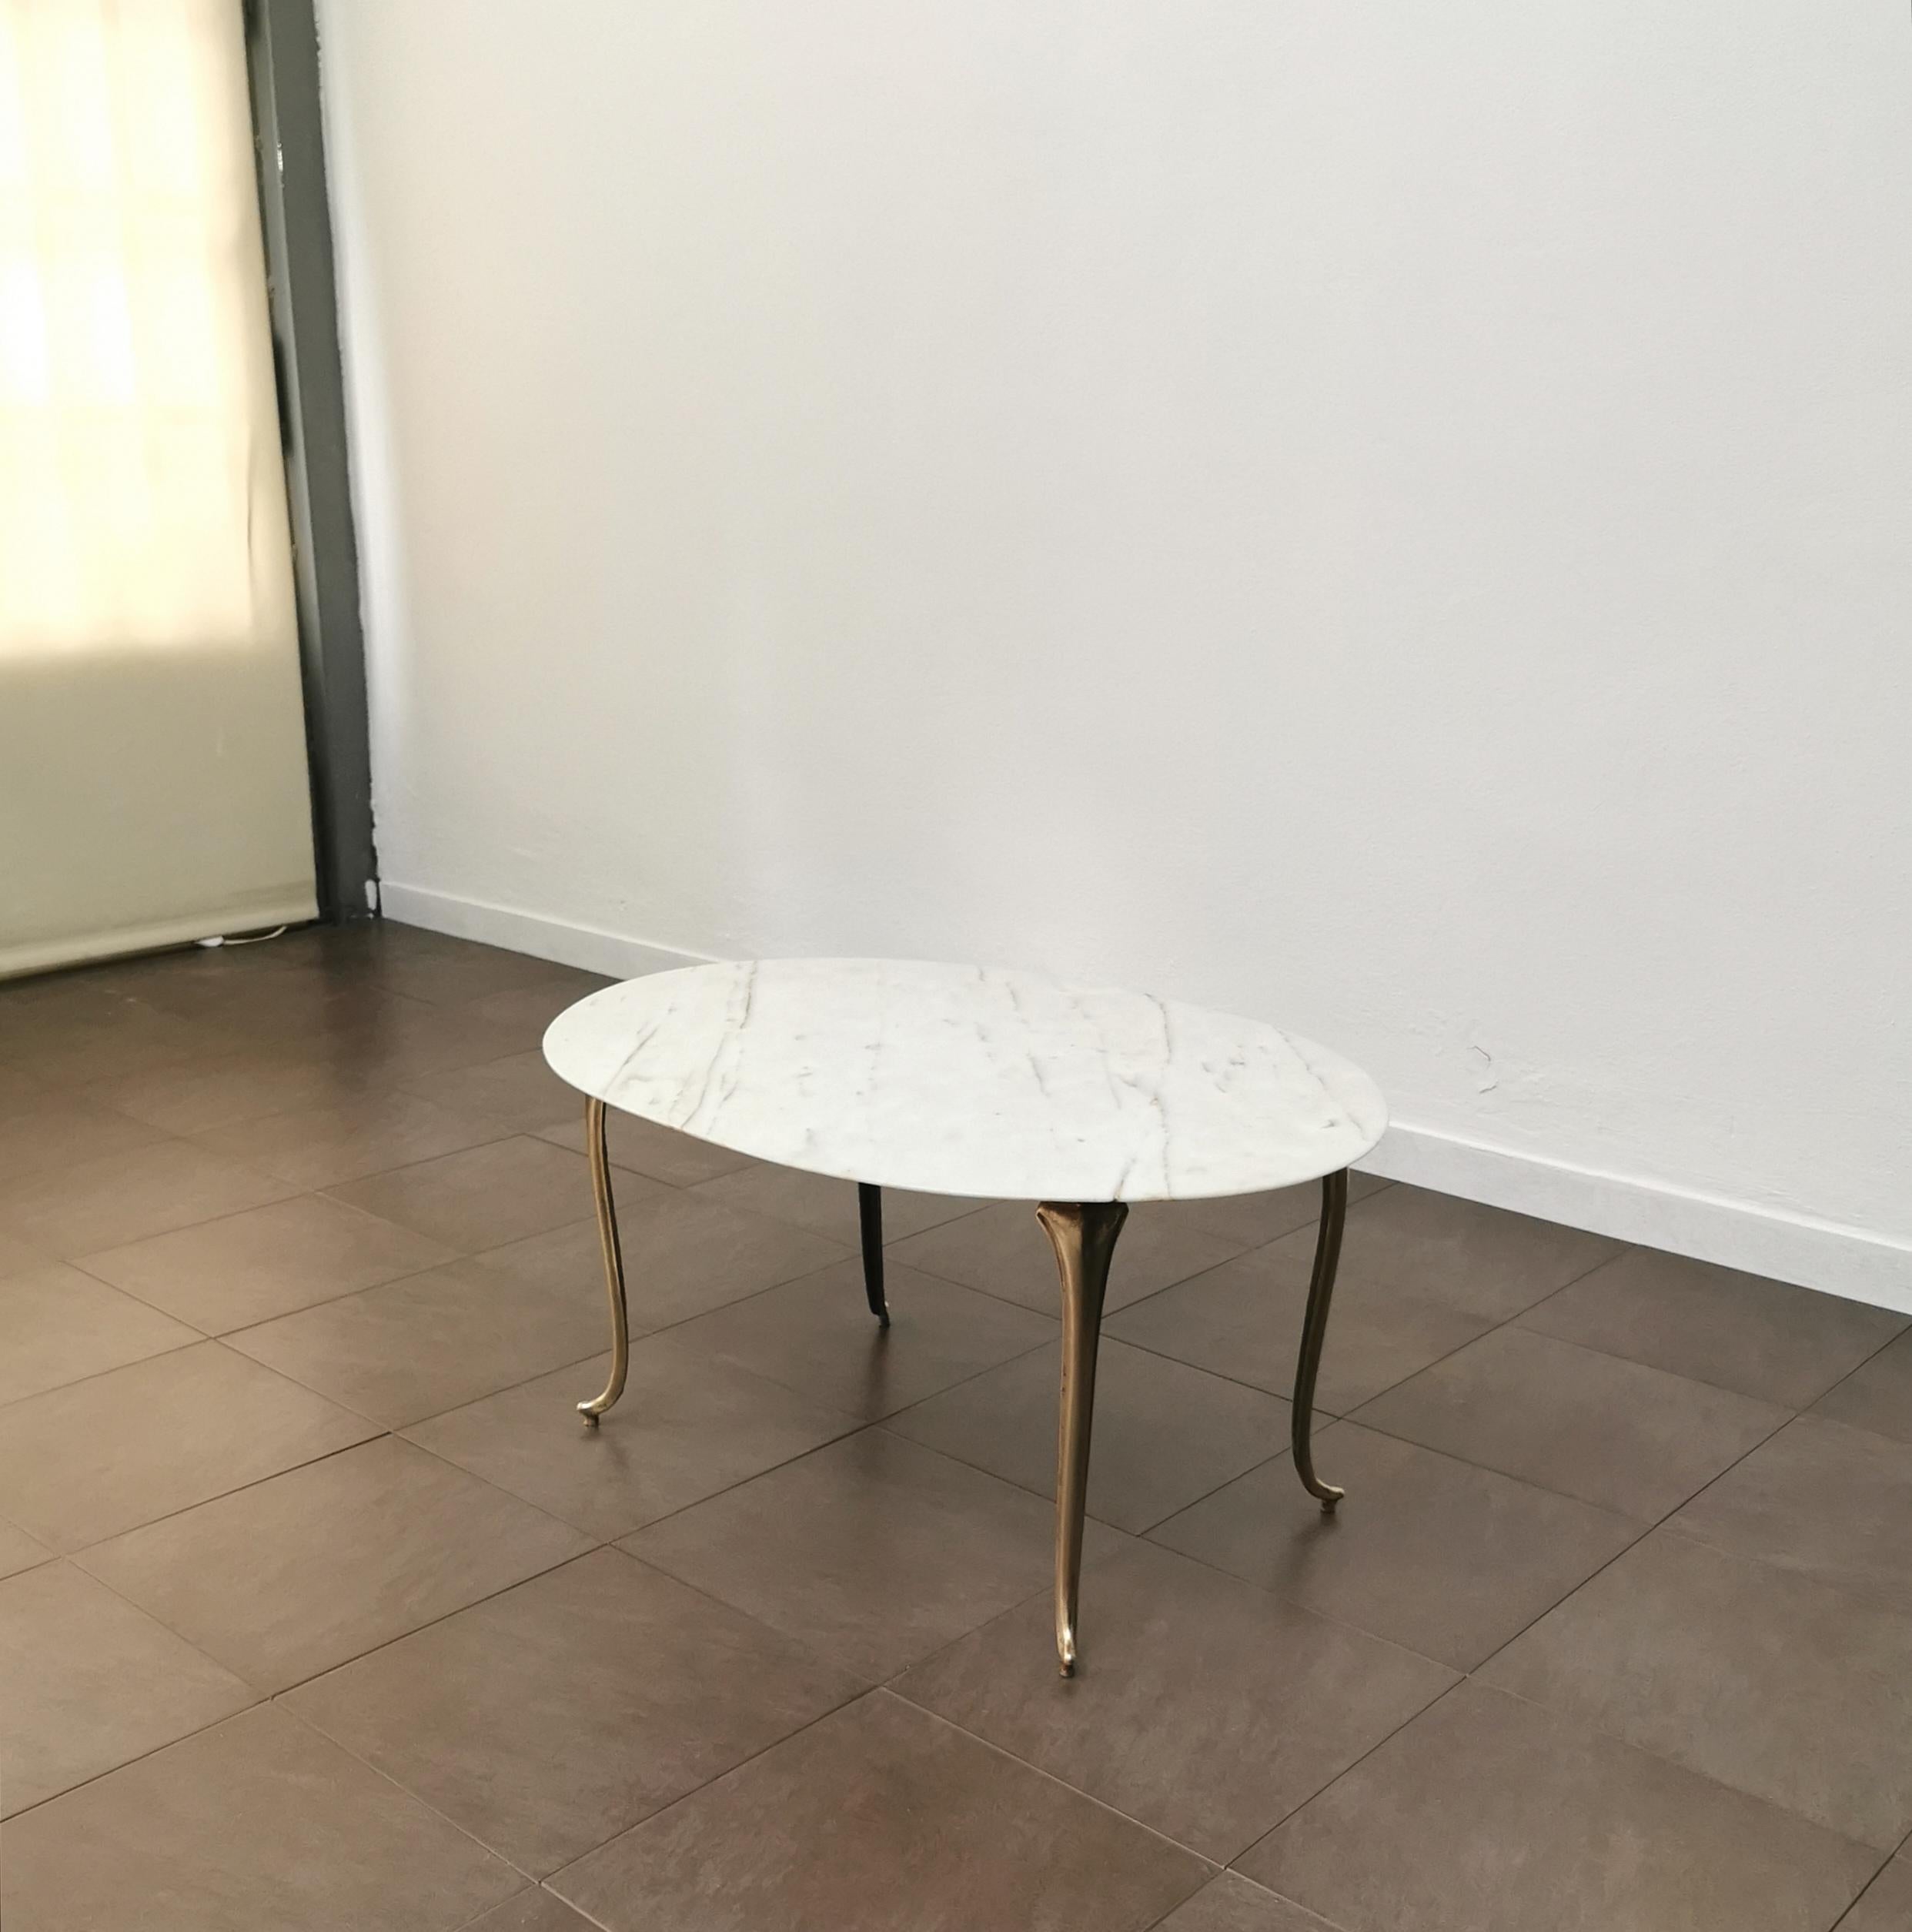 20th Century Midcentury Coffee Cocktail Table Brass White Marble Oval Italian Design 1950s